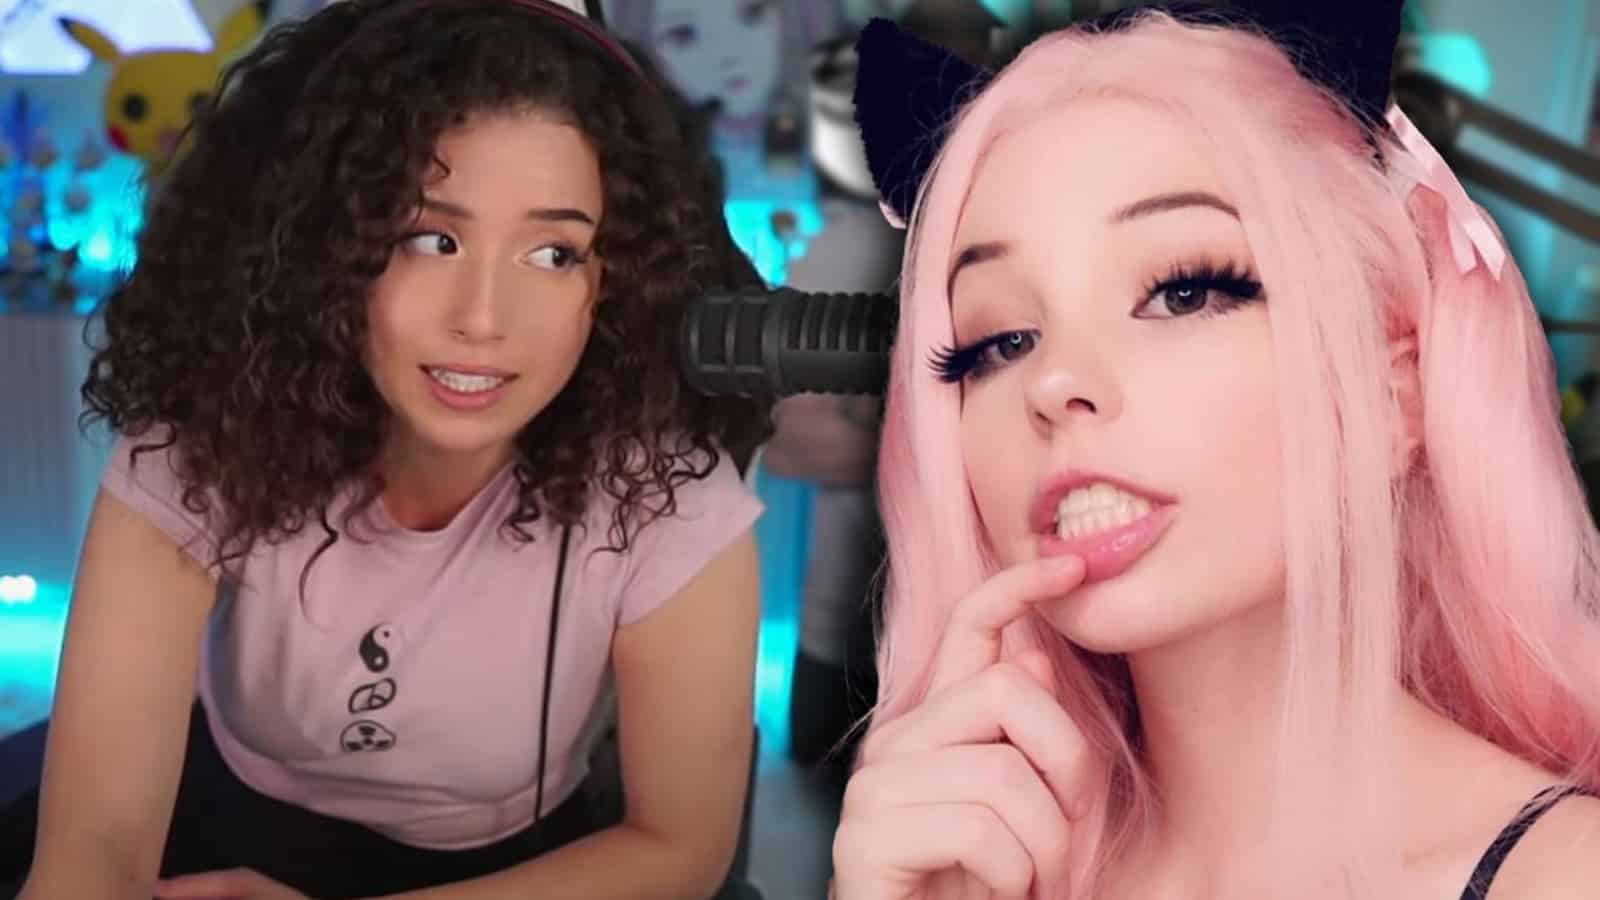 Pokimane says there “isn't a reason” for Belle Delphine to return